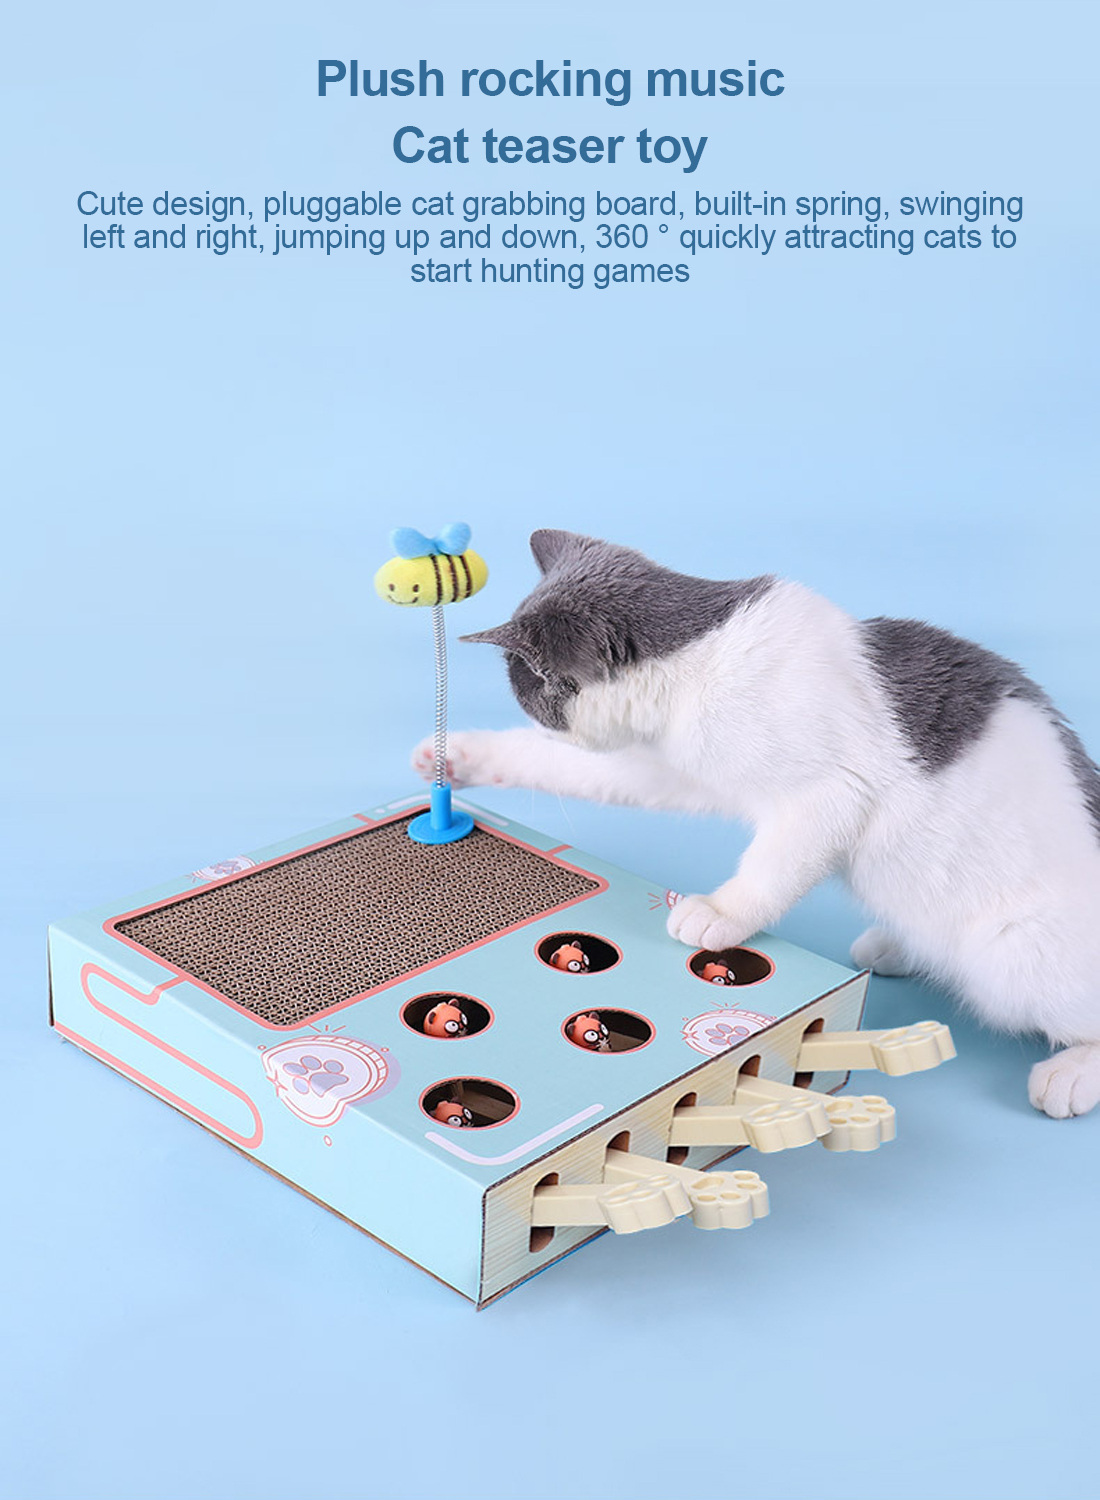 Cat Toy Ground Squirrel Corrugated Paper Cat Scratch Board Multifunctional (Five Hole Groundhog Cat Toy)